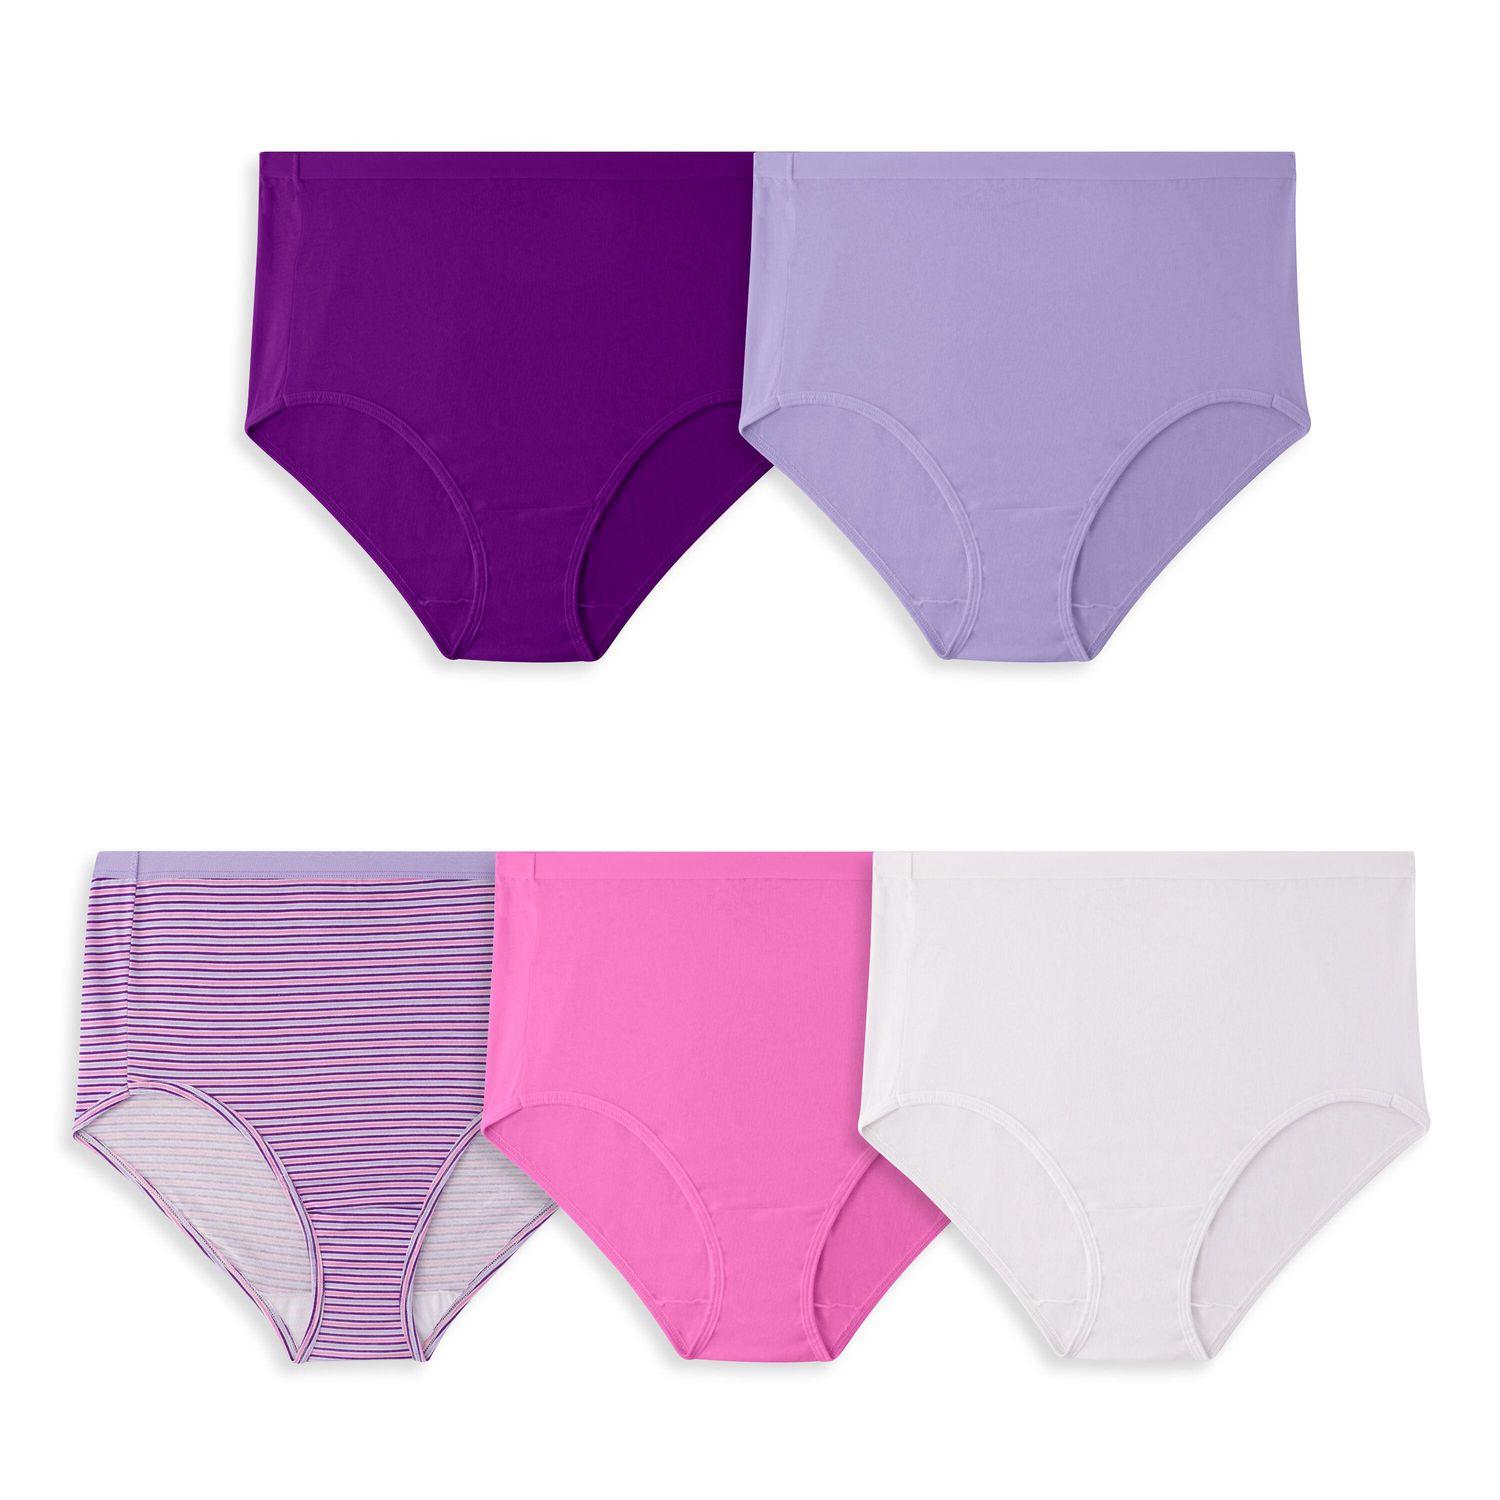 Fruit of the Loom Women's Briefs (Pack of 4)